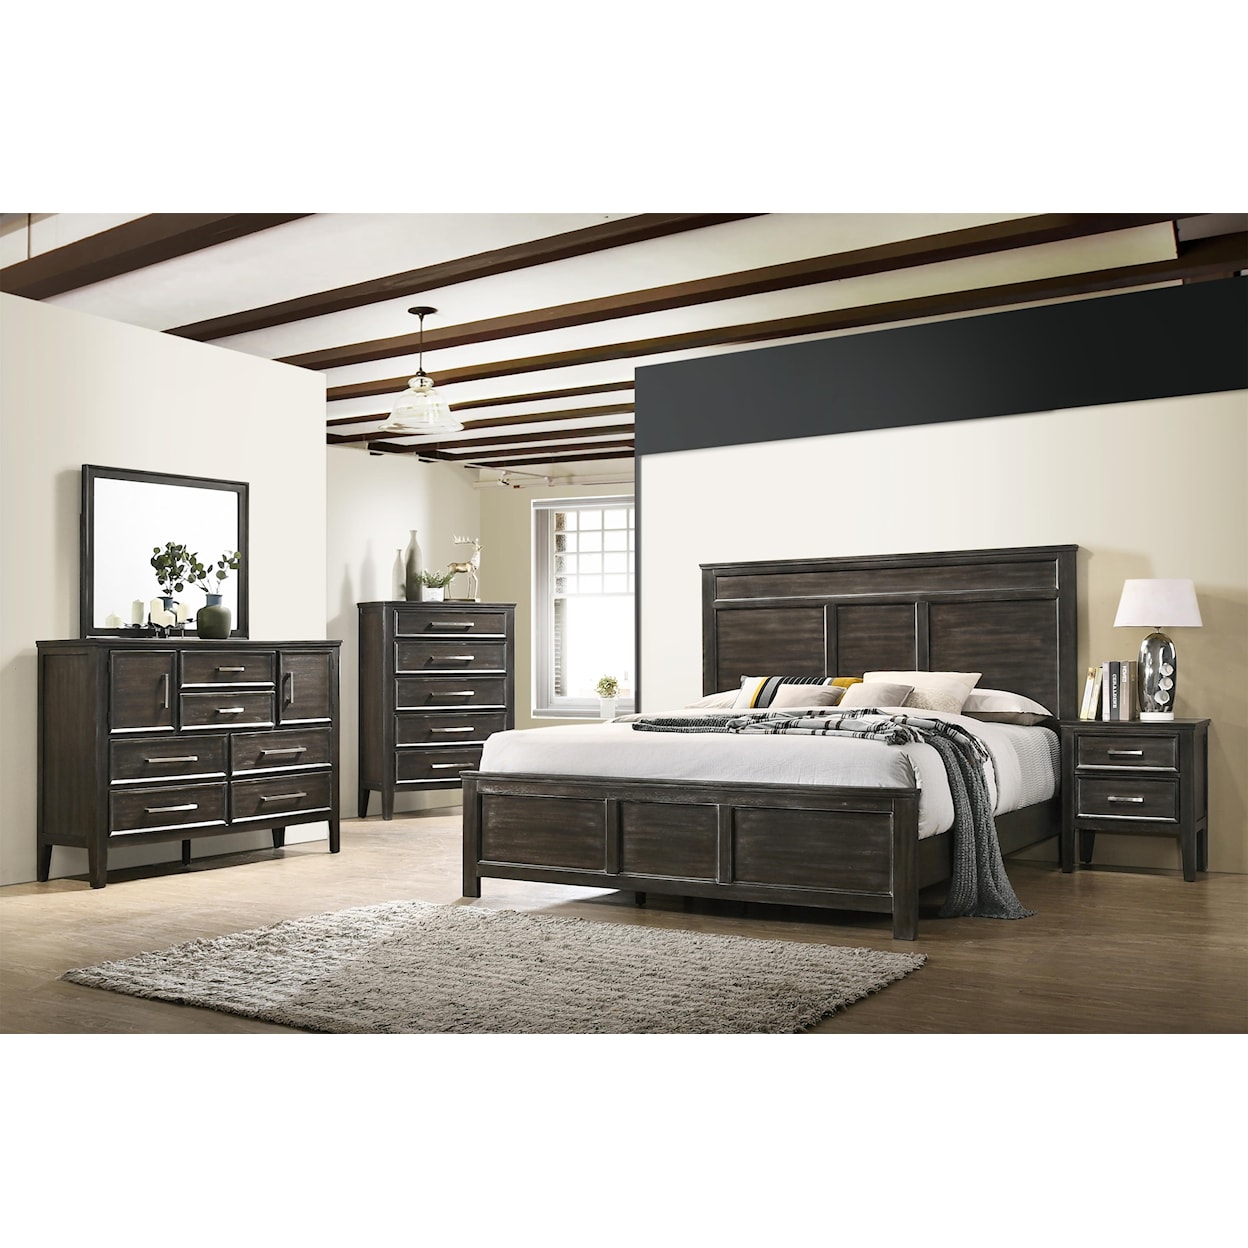 New Classic Andover 6 Piece King Bedroom Group